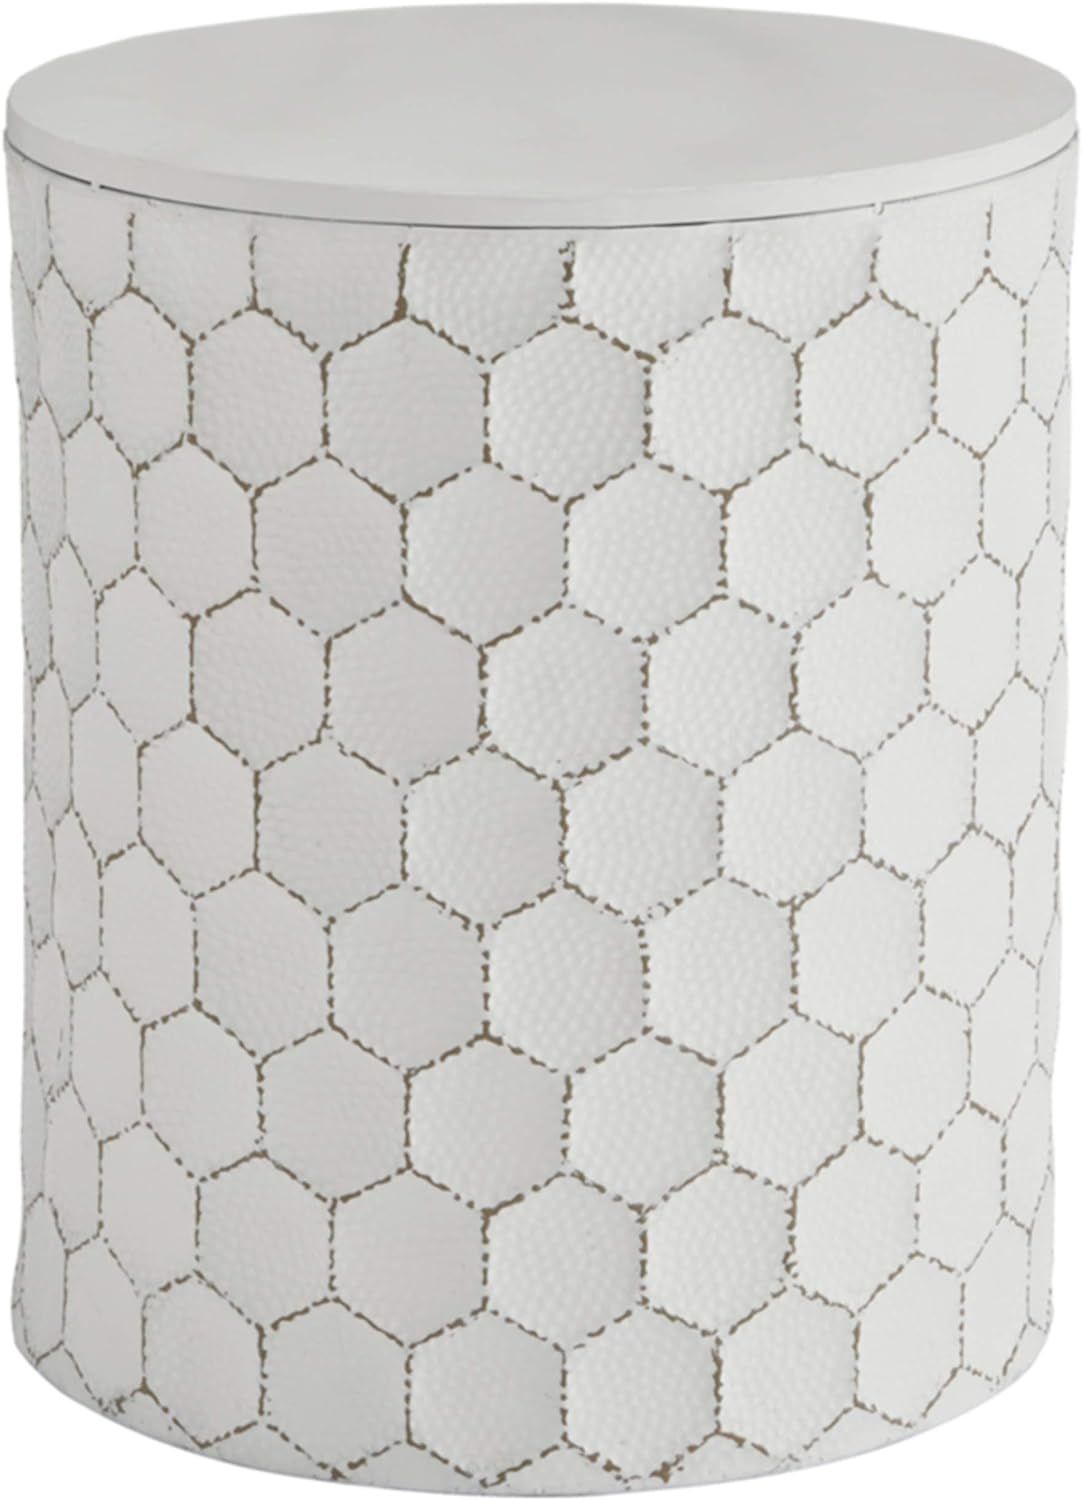 Signature Design by Ashley Polly Geometric Honeycomb Indoor & Outdoor Accent Stool, White | Amazon (US)